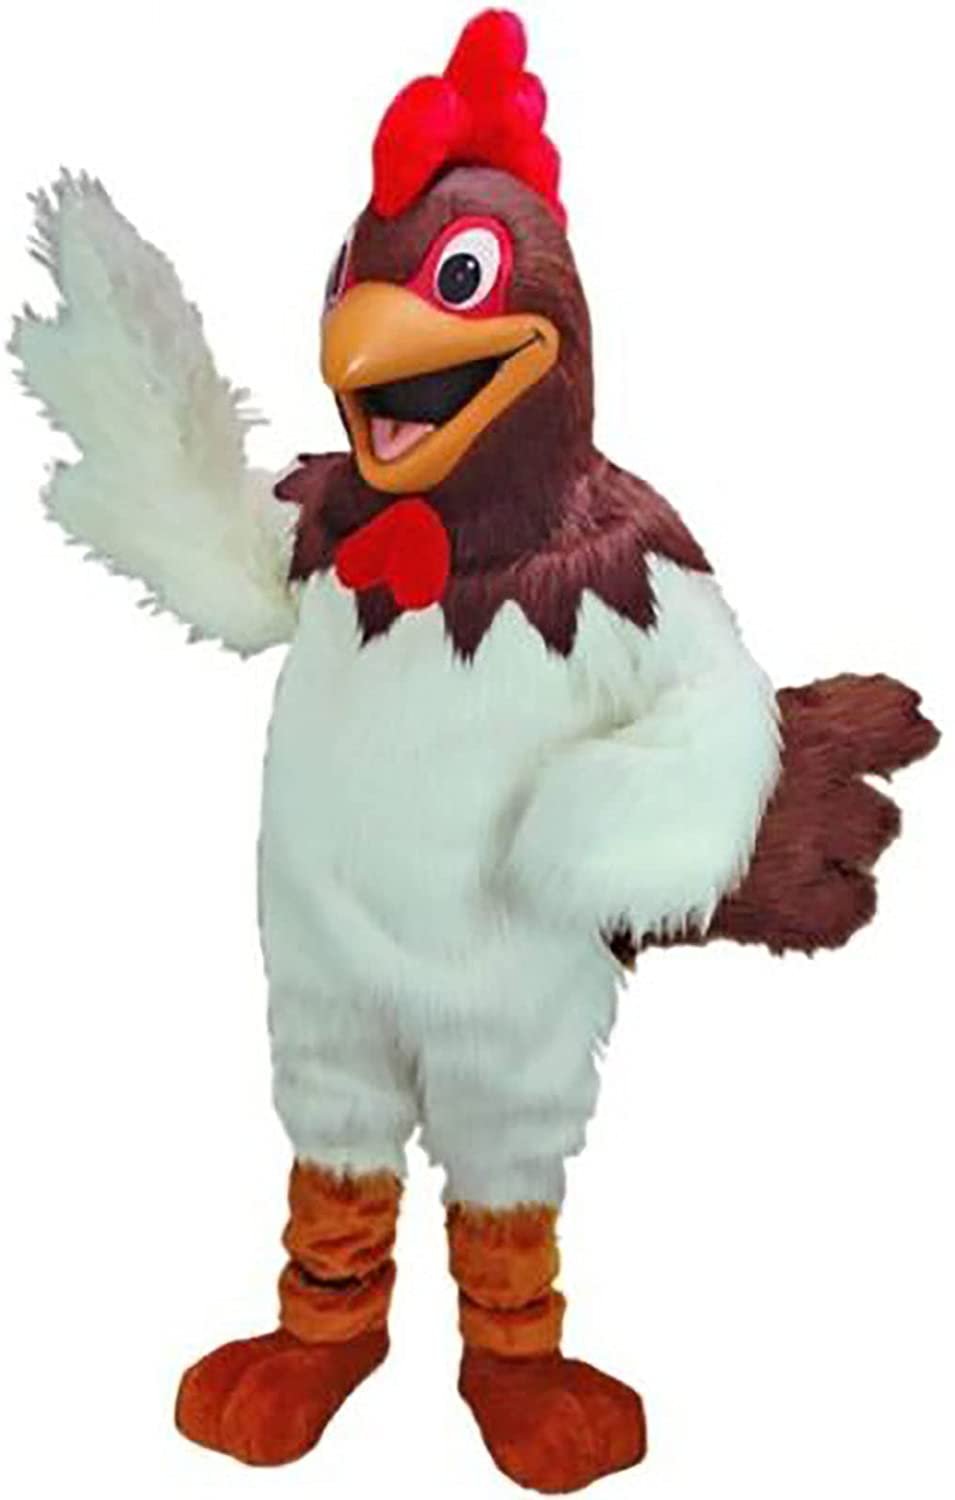 Randy Rooster Professional Quality Mascot Costume Adult Size Mascot Costume Cosplay Party Character Fancy Dress Adult Suit Unisex Hallowen Cosplay Gift -  by FurryMascot - 